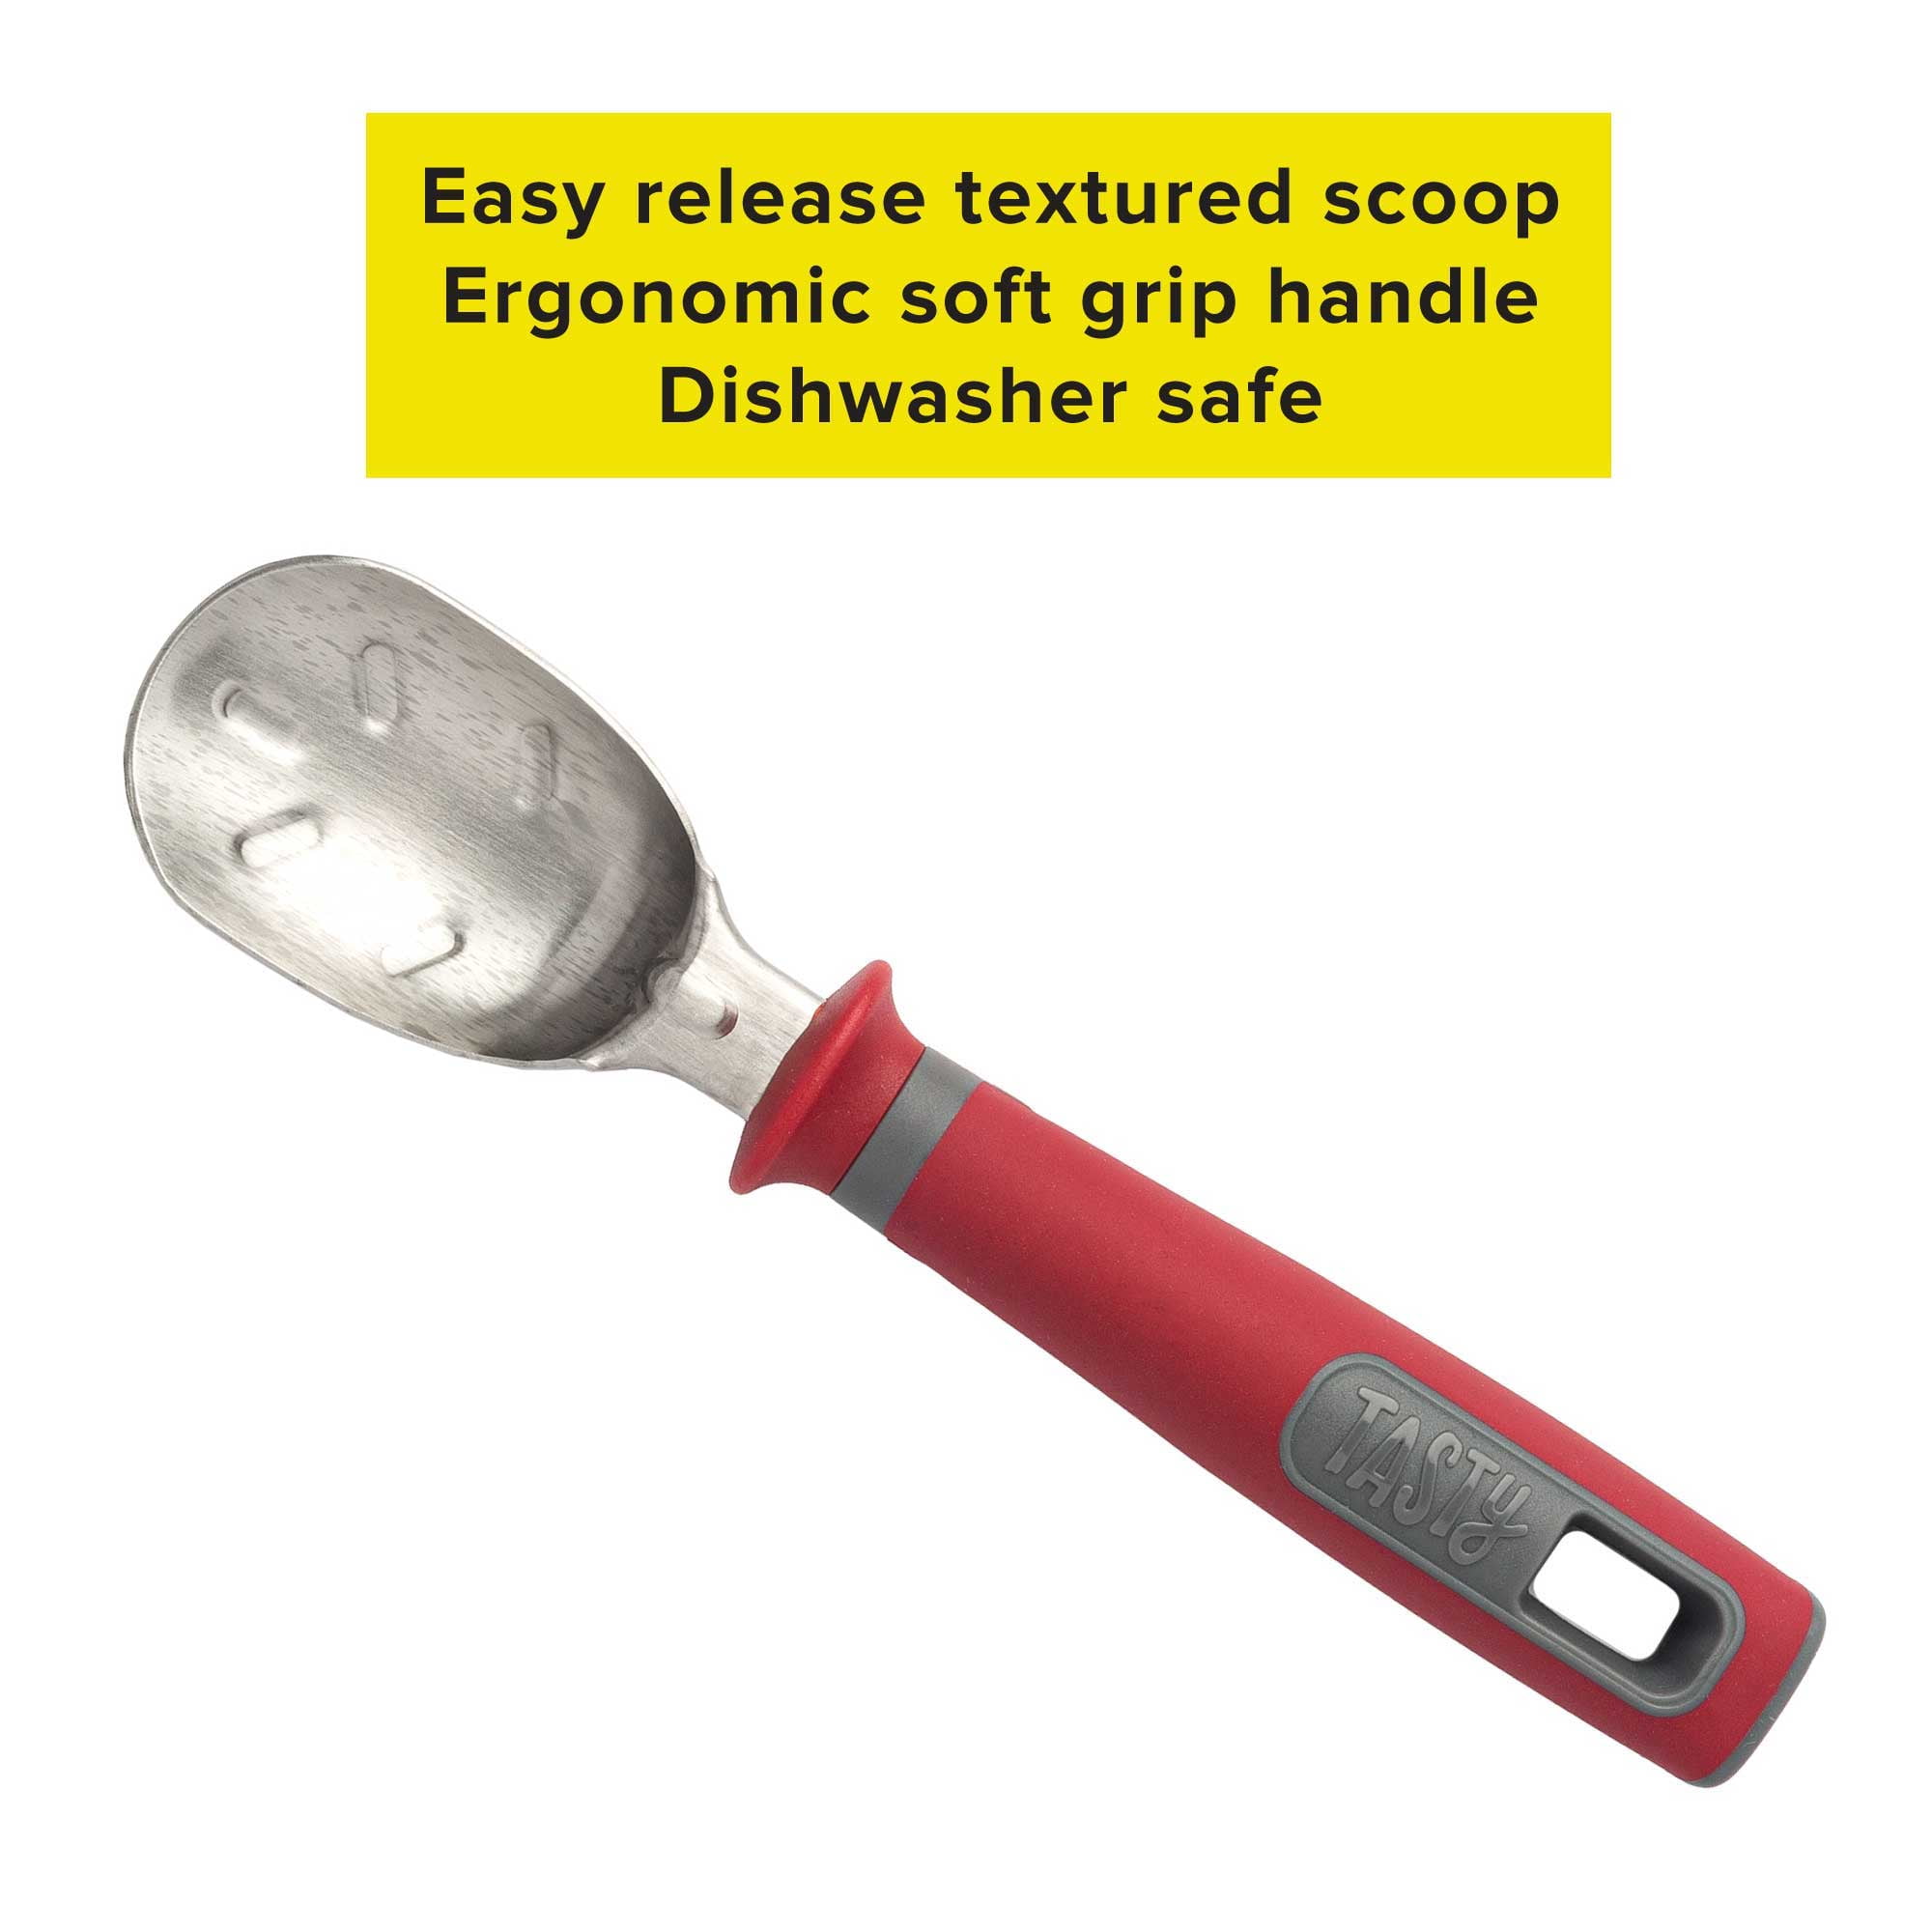 Solid Stainless Steel Ice Cream Scoop with Non Slip Rubber Comfort Grip Handle: Perfect for Ice Cream Shops, Restaurants, and Food Trucks - Dishwasher